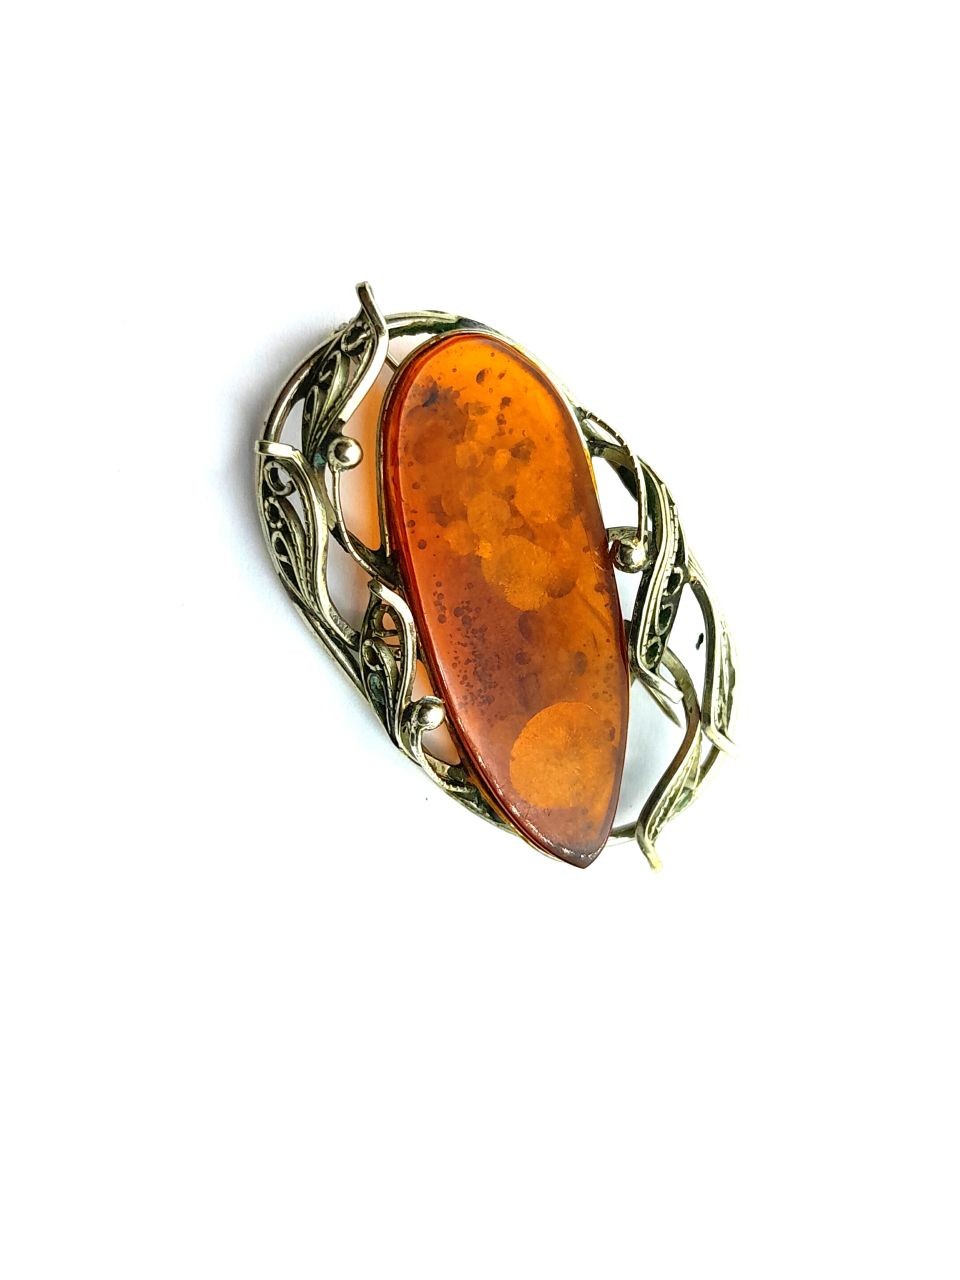 Silver and amber brooch